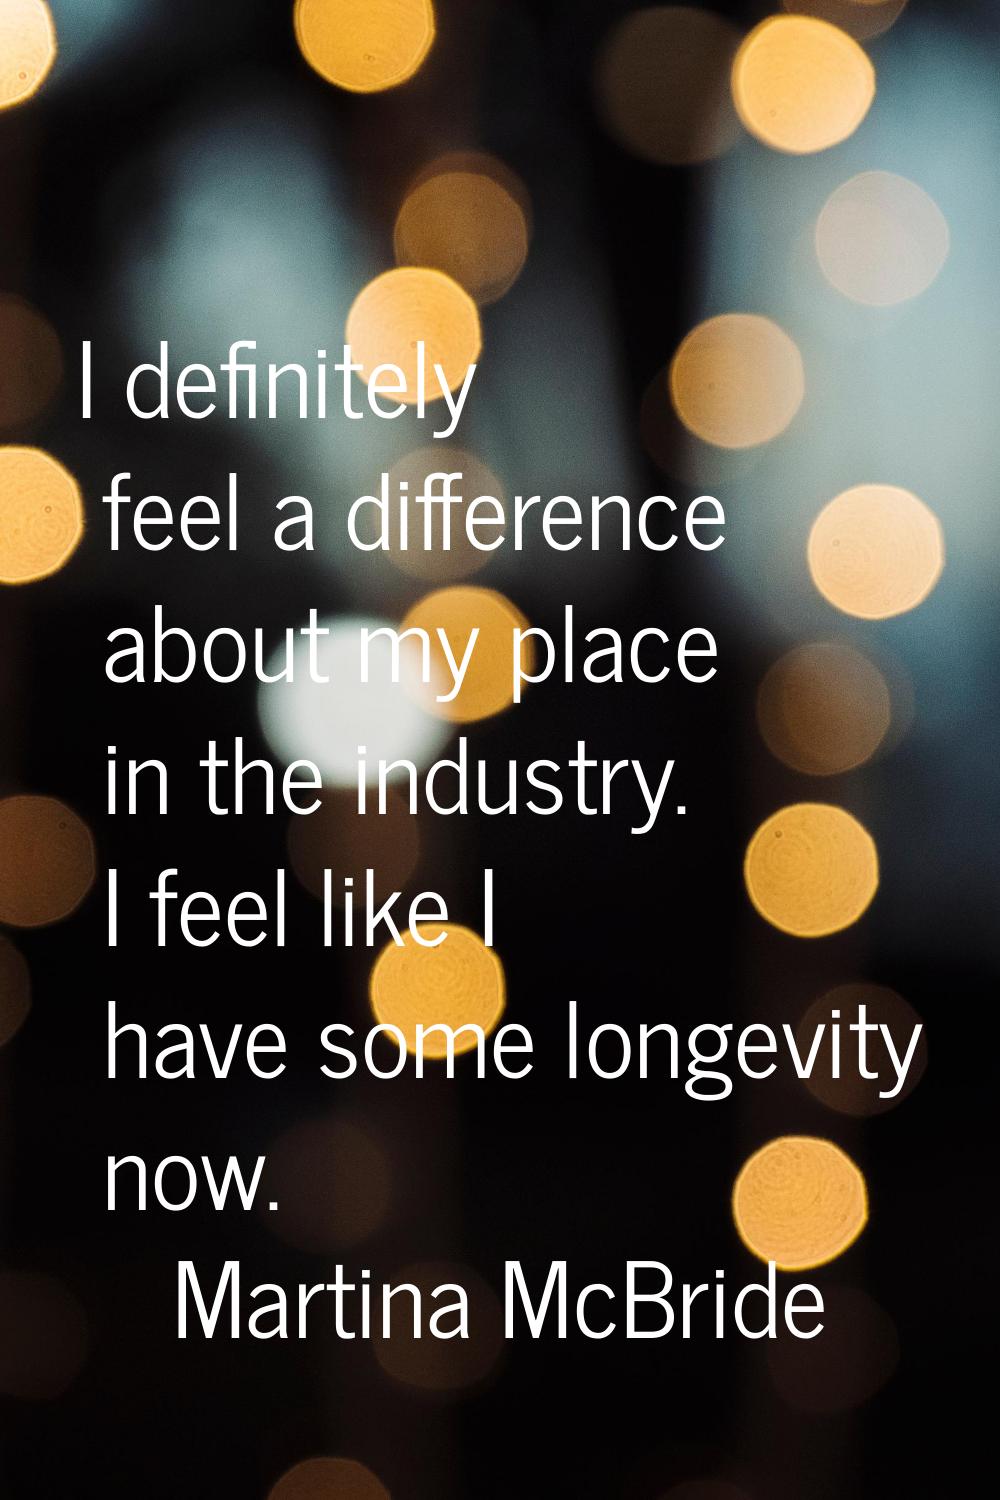 I definitely feel a difference about my place in the industry. I feel like I have some longevity no